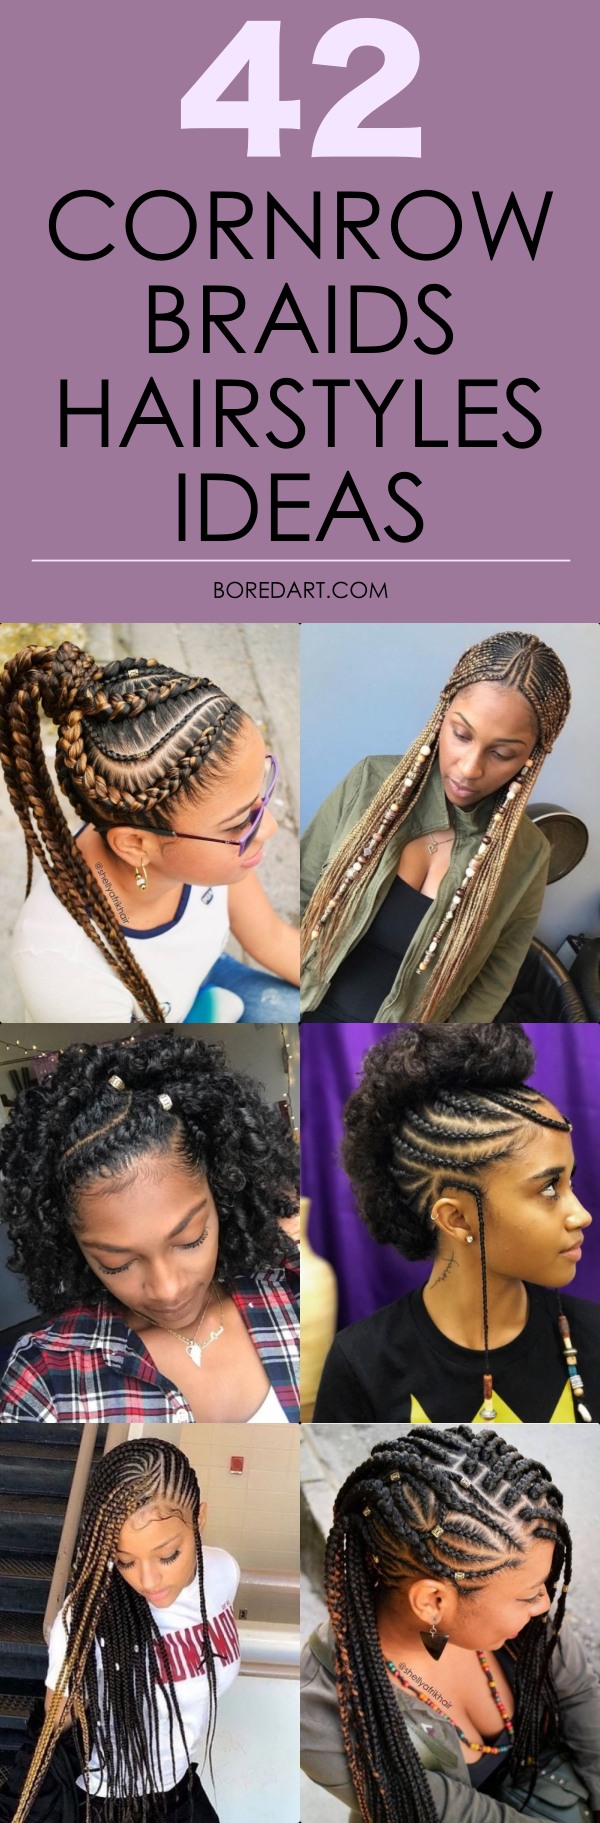 20 Best Cornrow Hairstyle Ideas for 2020